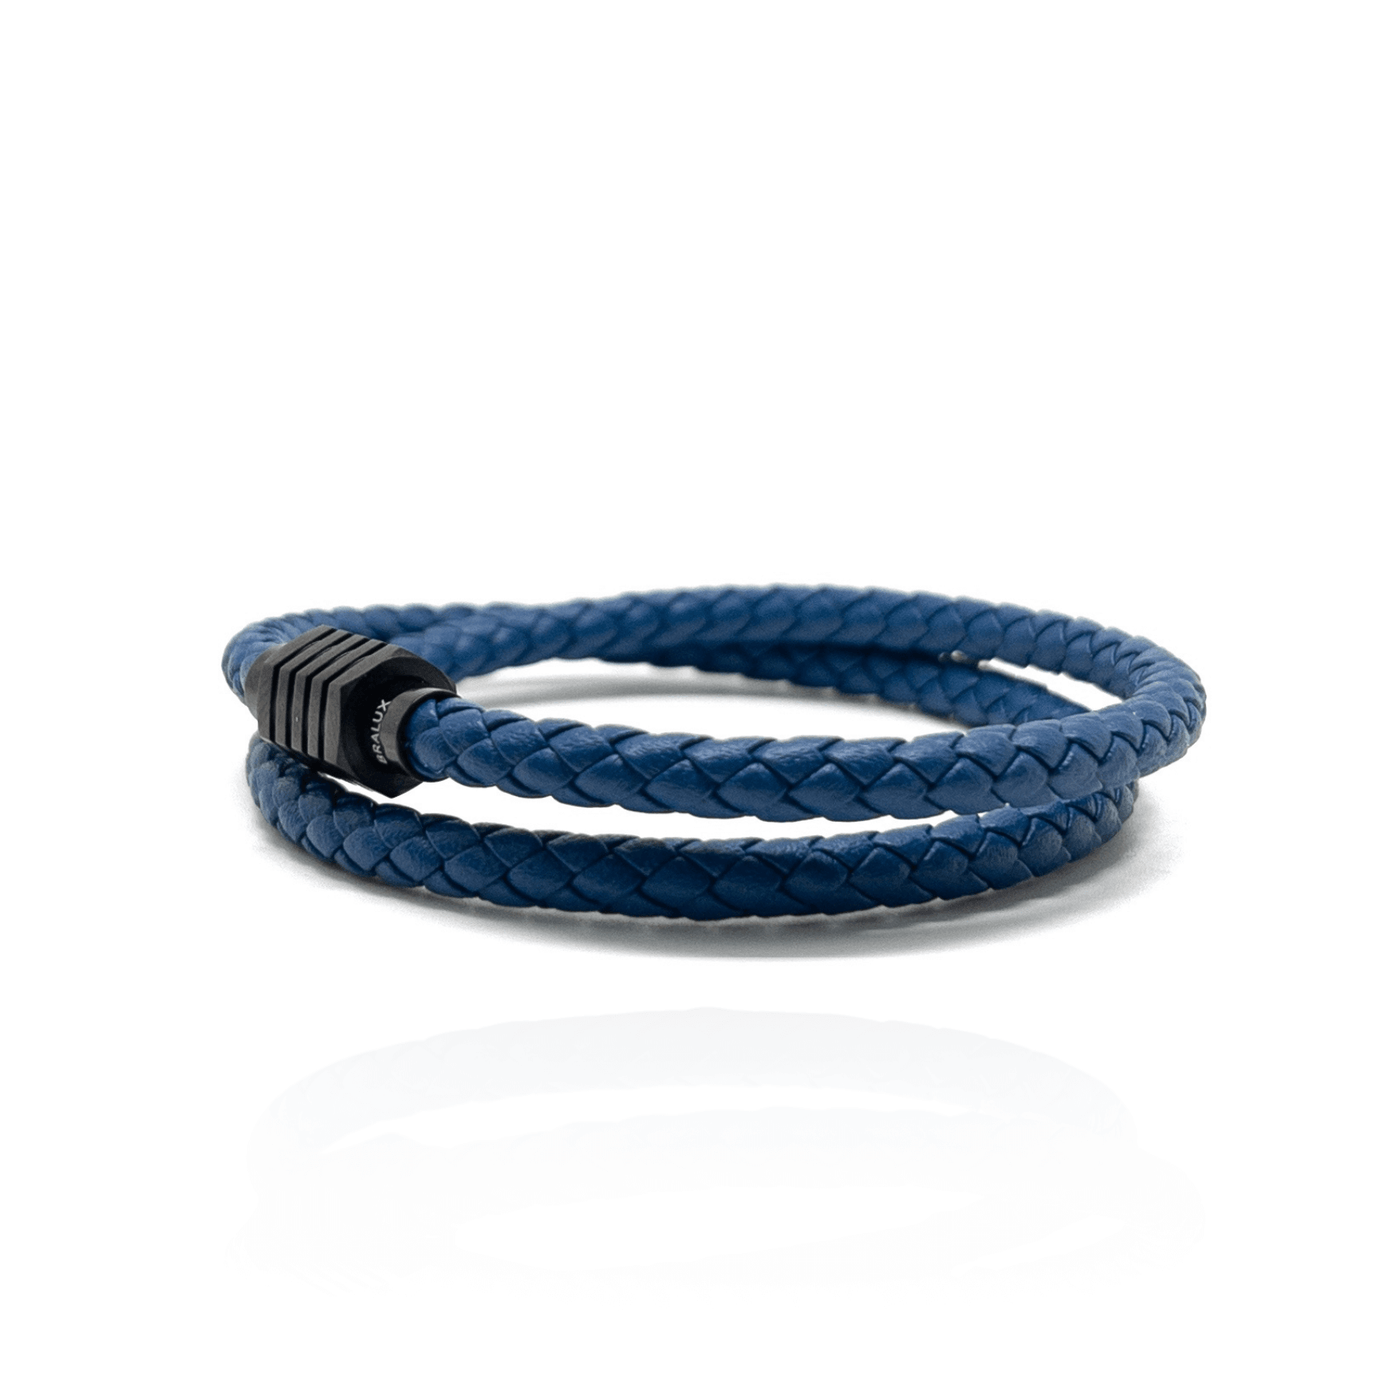 The Dark Blue duo and Black Plated Buckle Leather bracelet